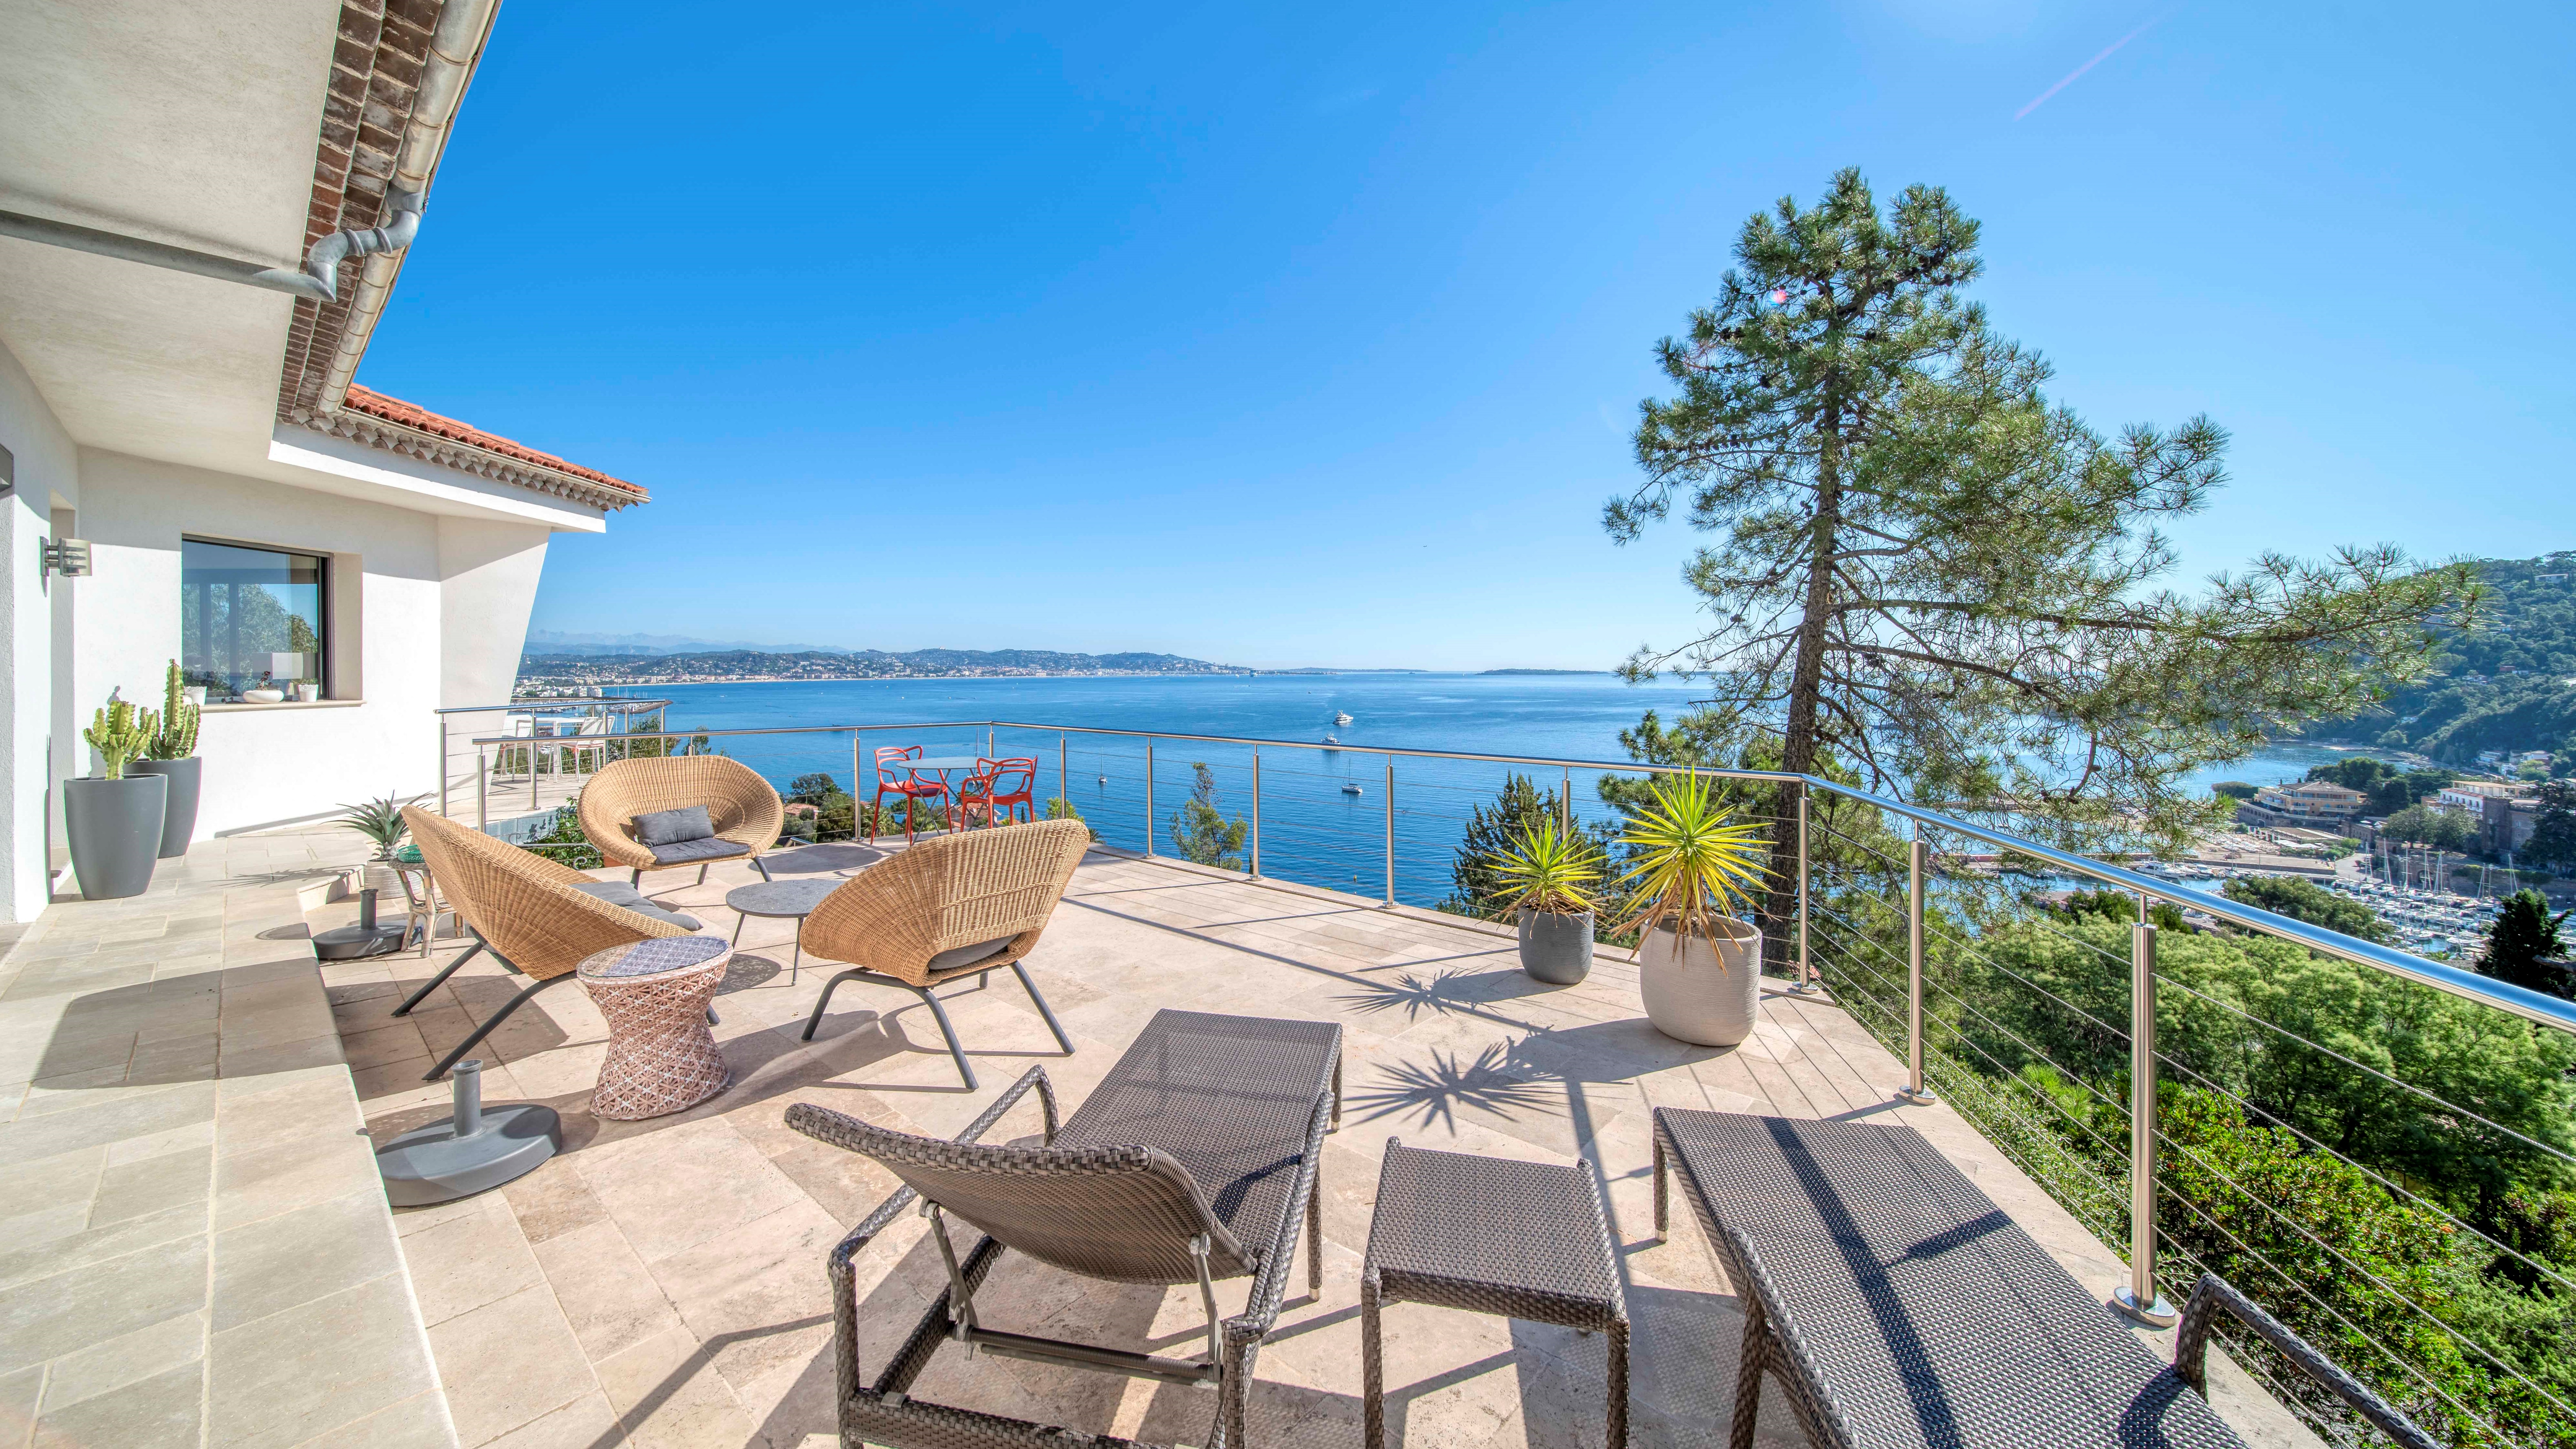 Luxury listing Cannes. Agence Europa offers you for sale a villa with sea view in Super Cannes - French Riviera